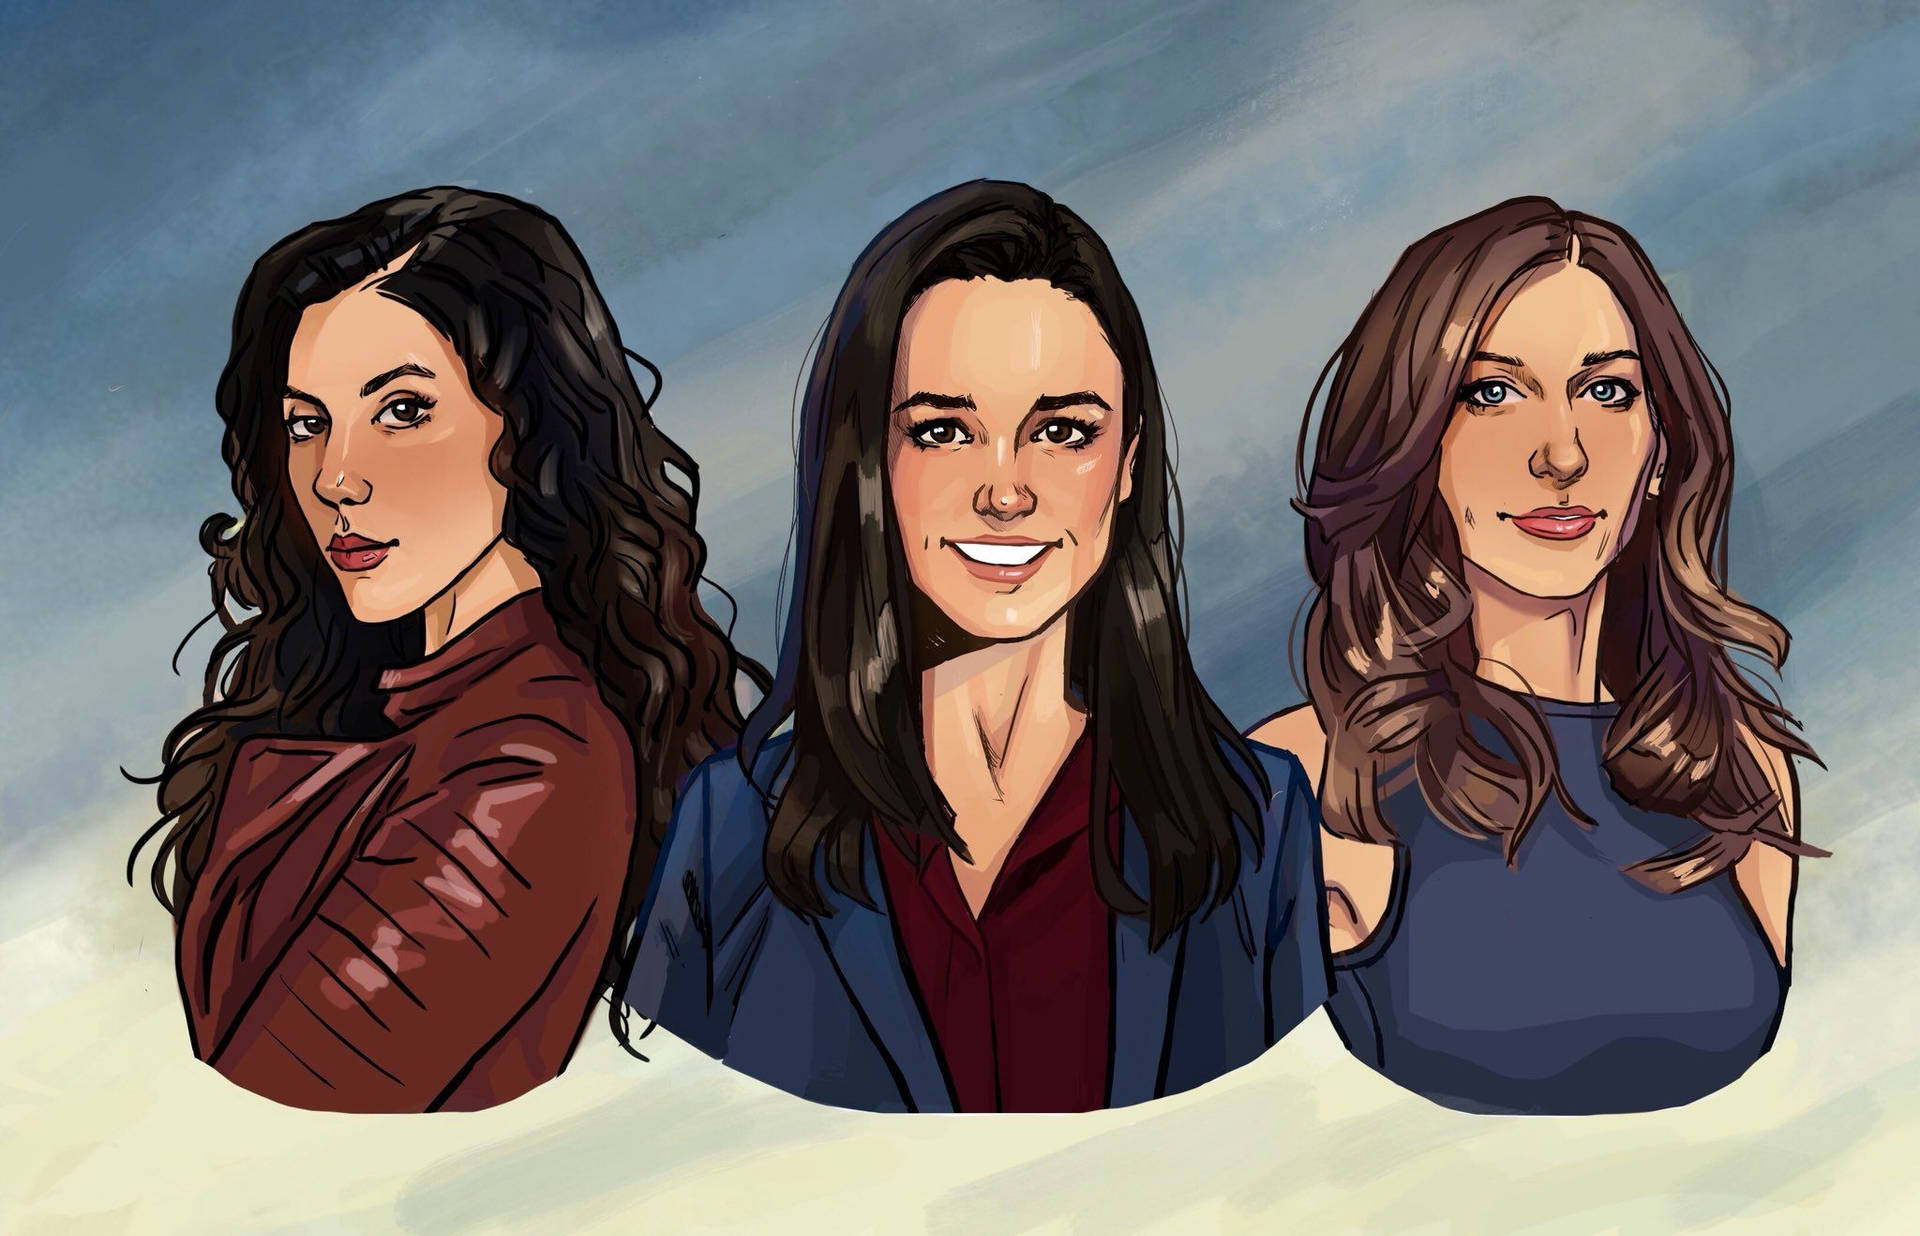 Get ready for some Brooklyn Nine Nine fun with Amy, Rosa, and Gina! Wallpaper